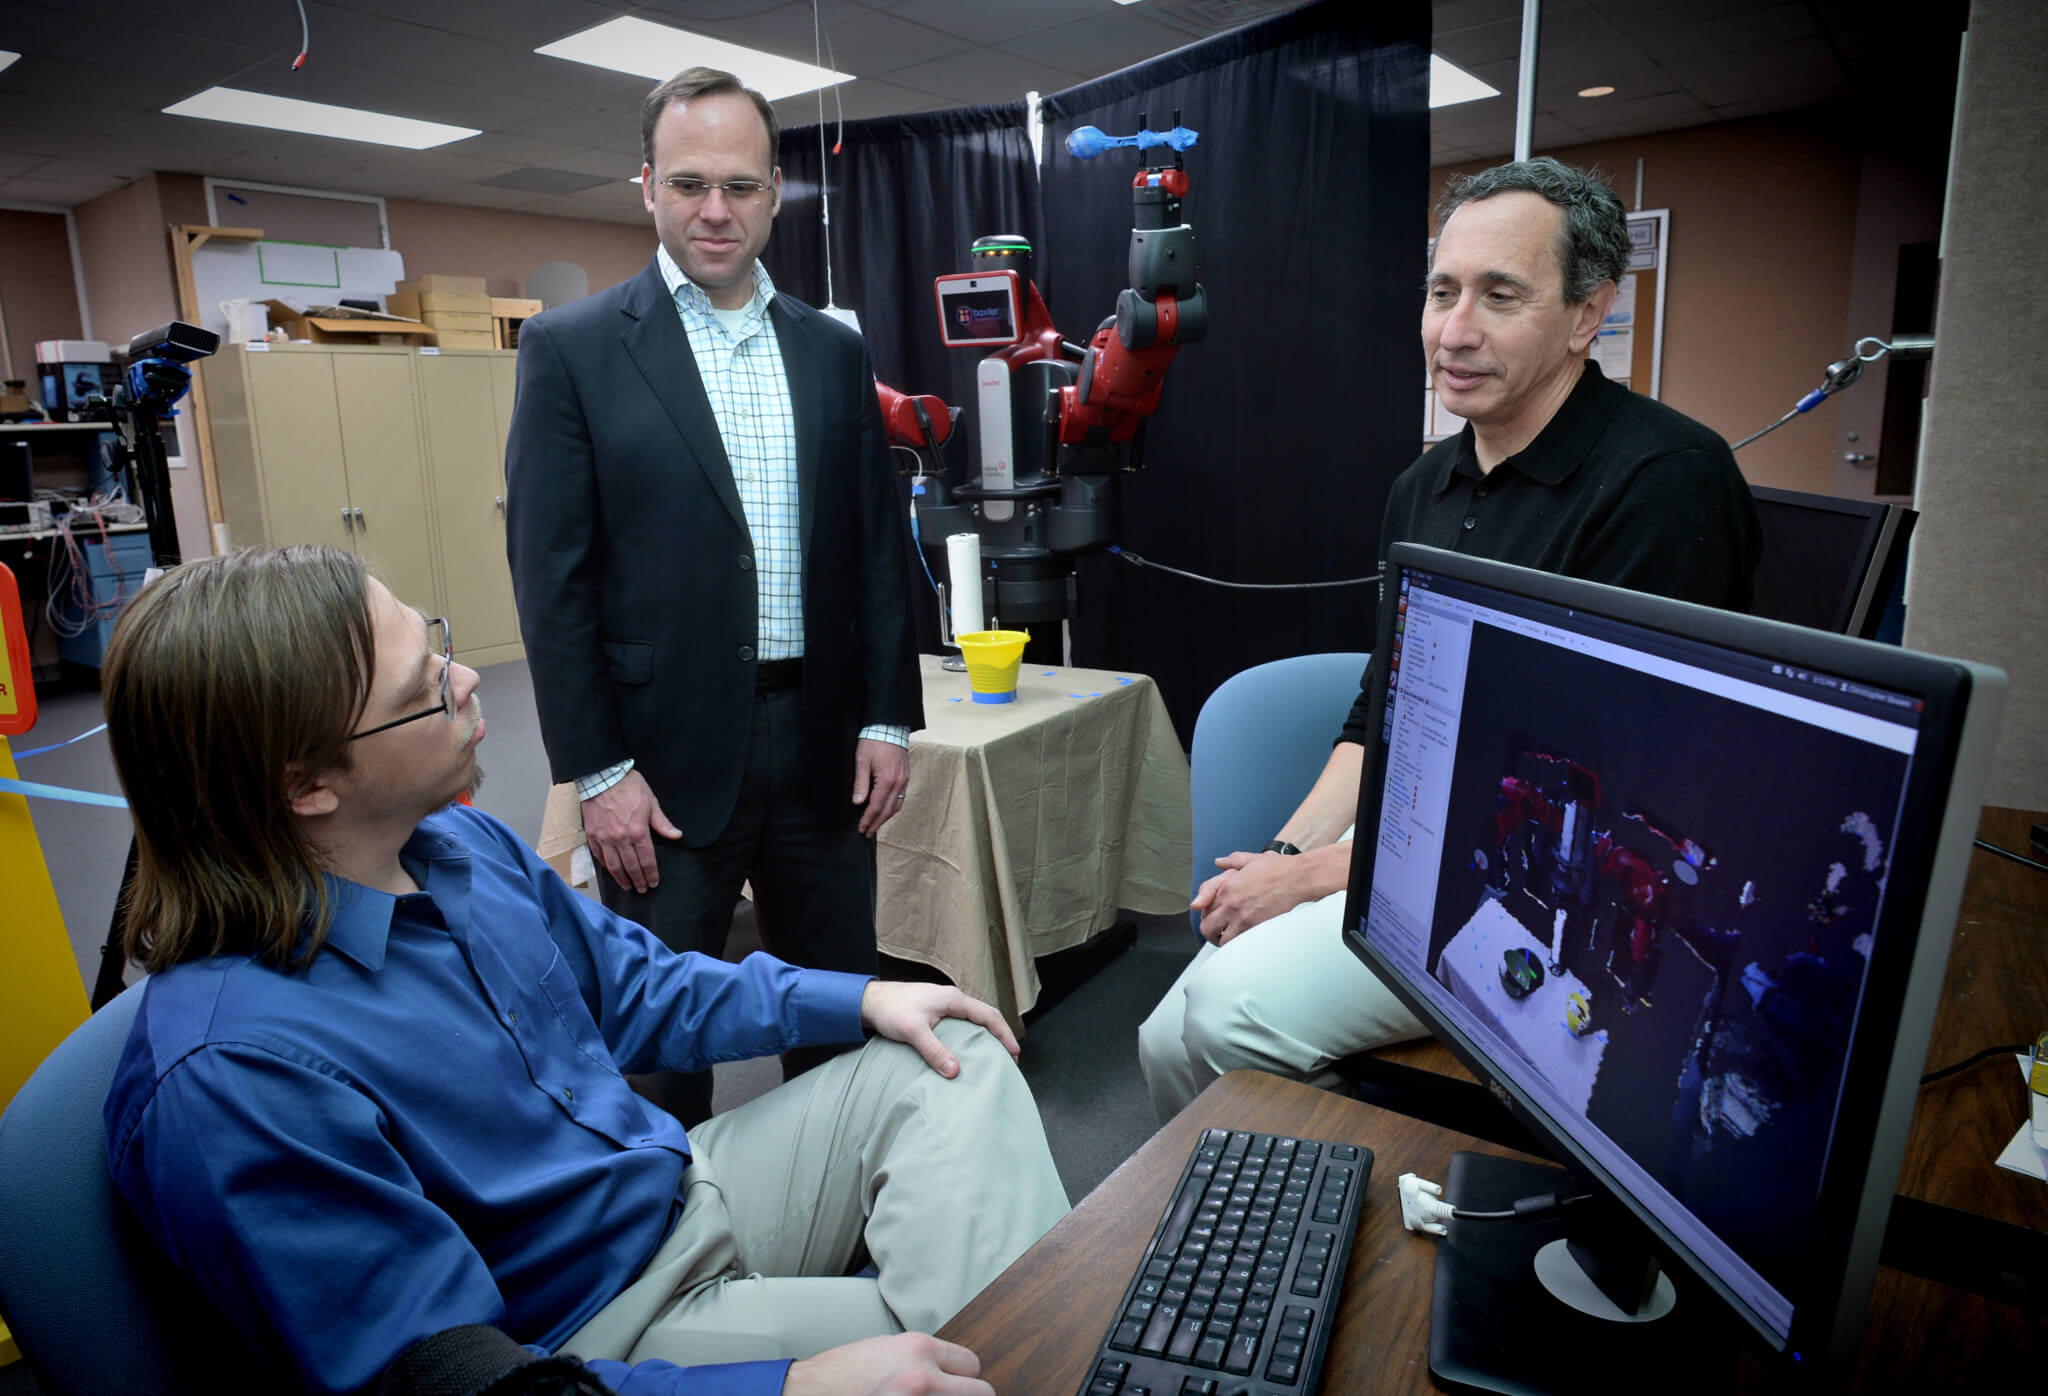 Kevin Jeffay, left, and Michael Fern talk with graduate student Chris Bowen, seated, in the robotics lab in the Department of Computer Science at the University of North Carolina at Chapel Hill